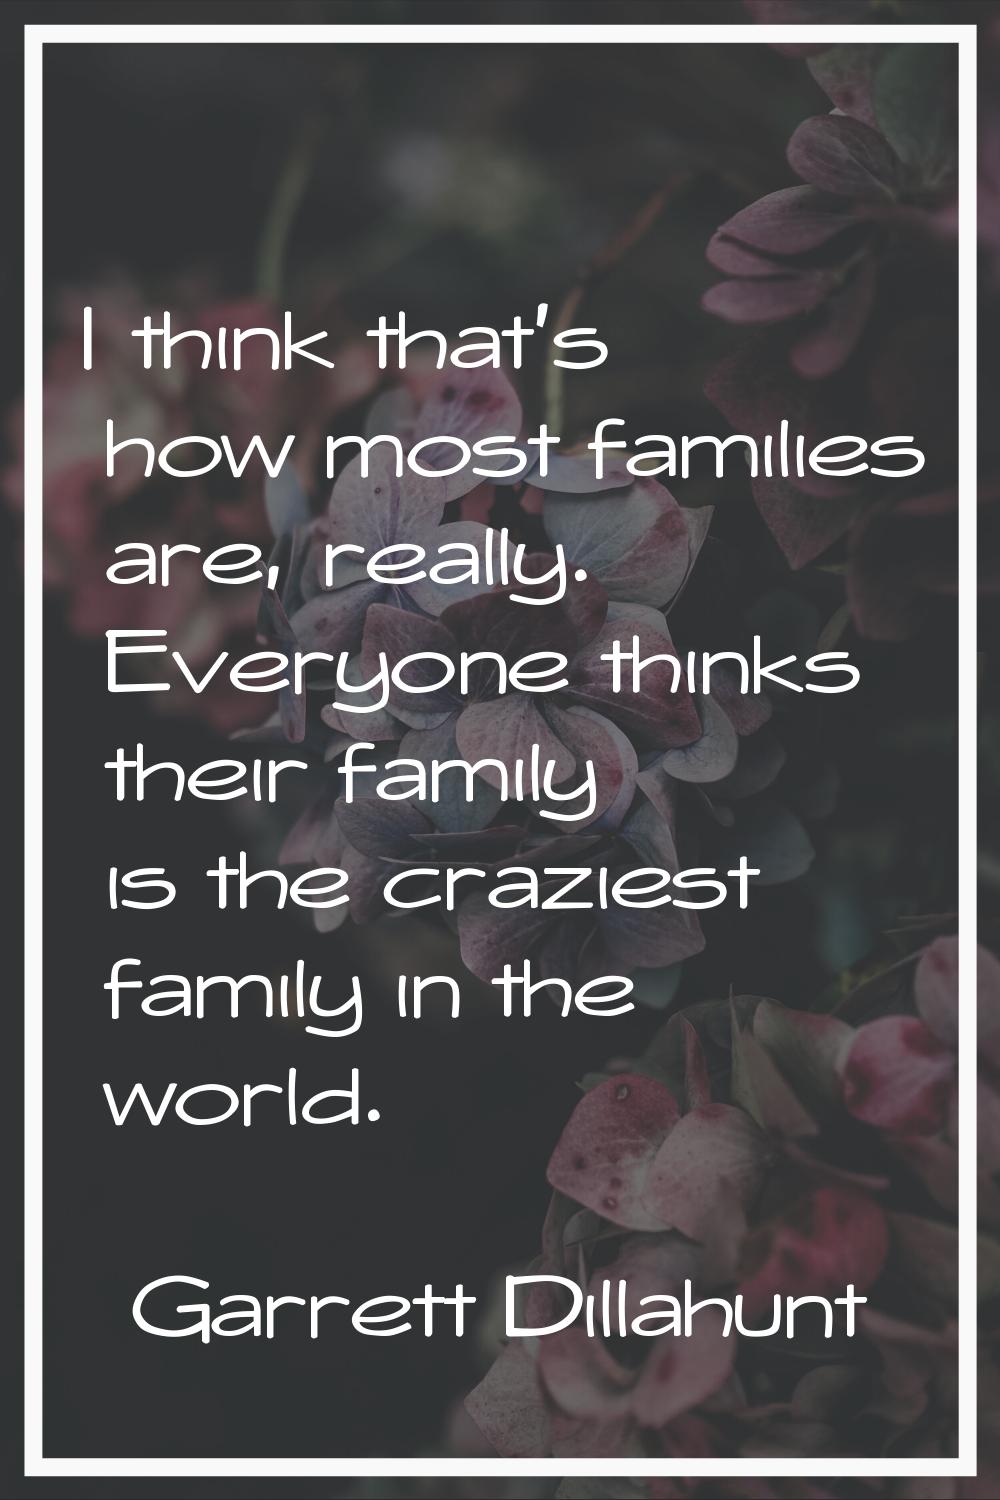 I think that's how most families are, really. Everyone thinks their family is the craziest family i